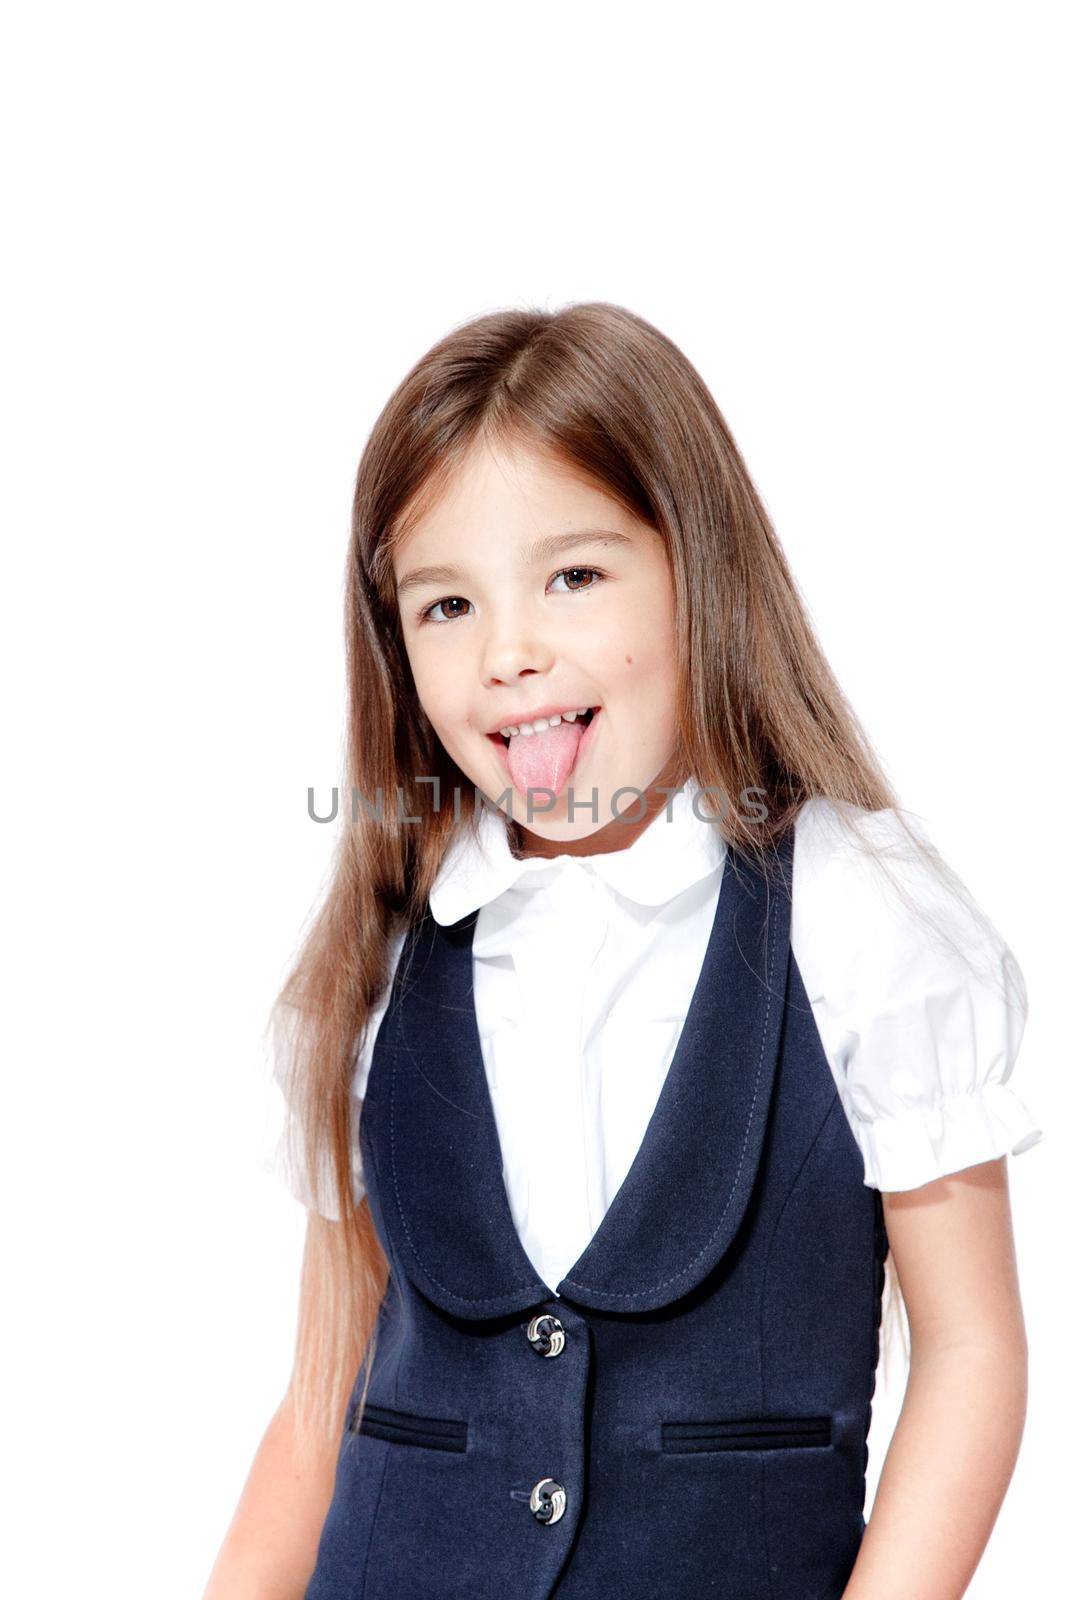 Portrait of cute smiling schoolgirl shows tongue, isolated on white background. by Taut